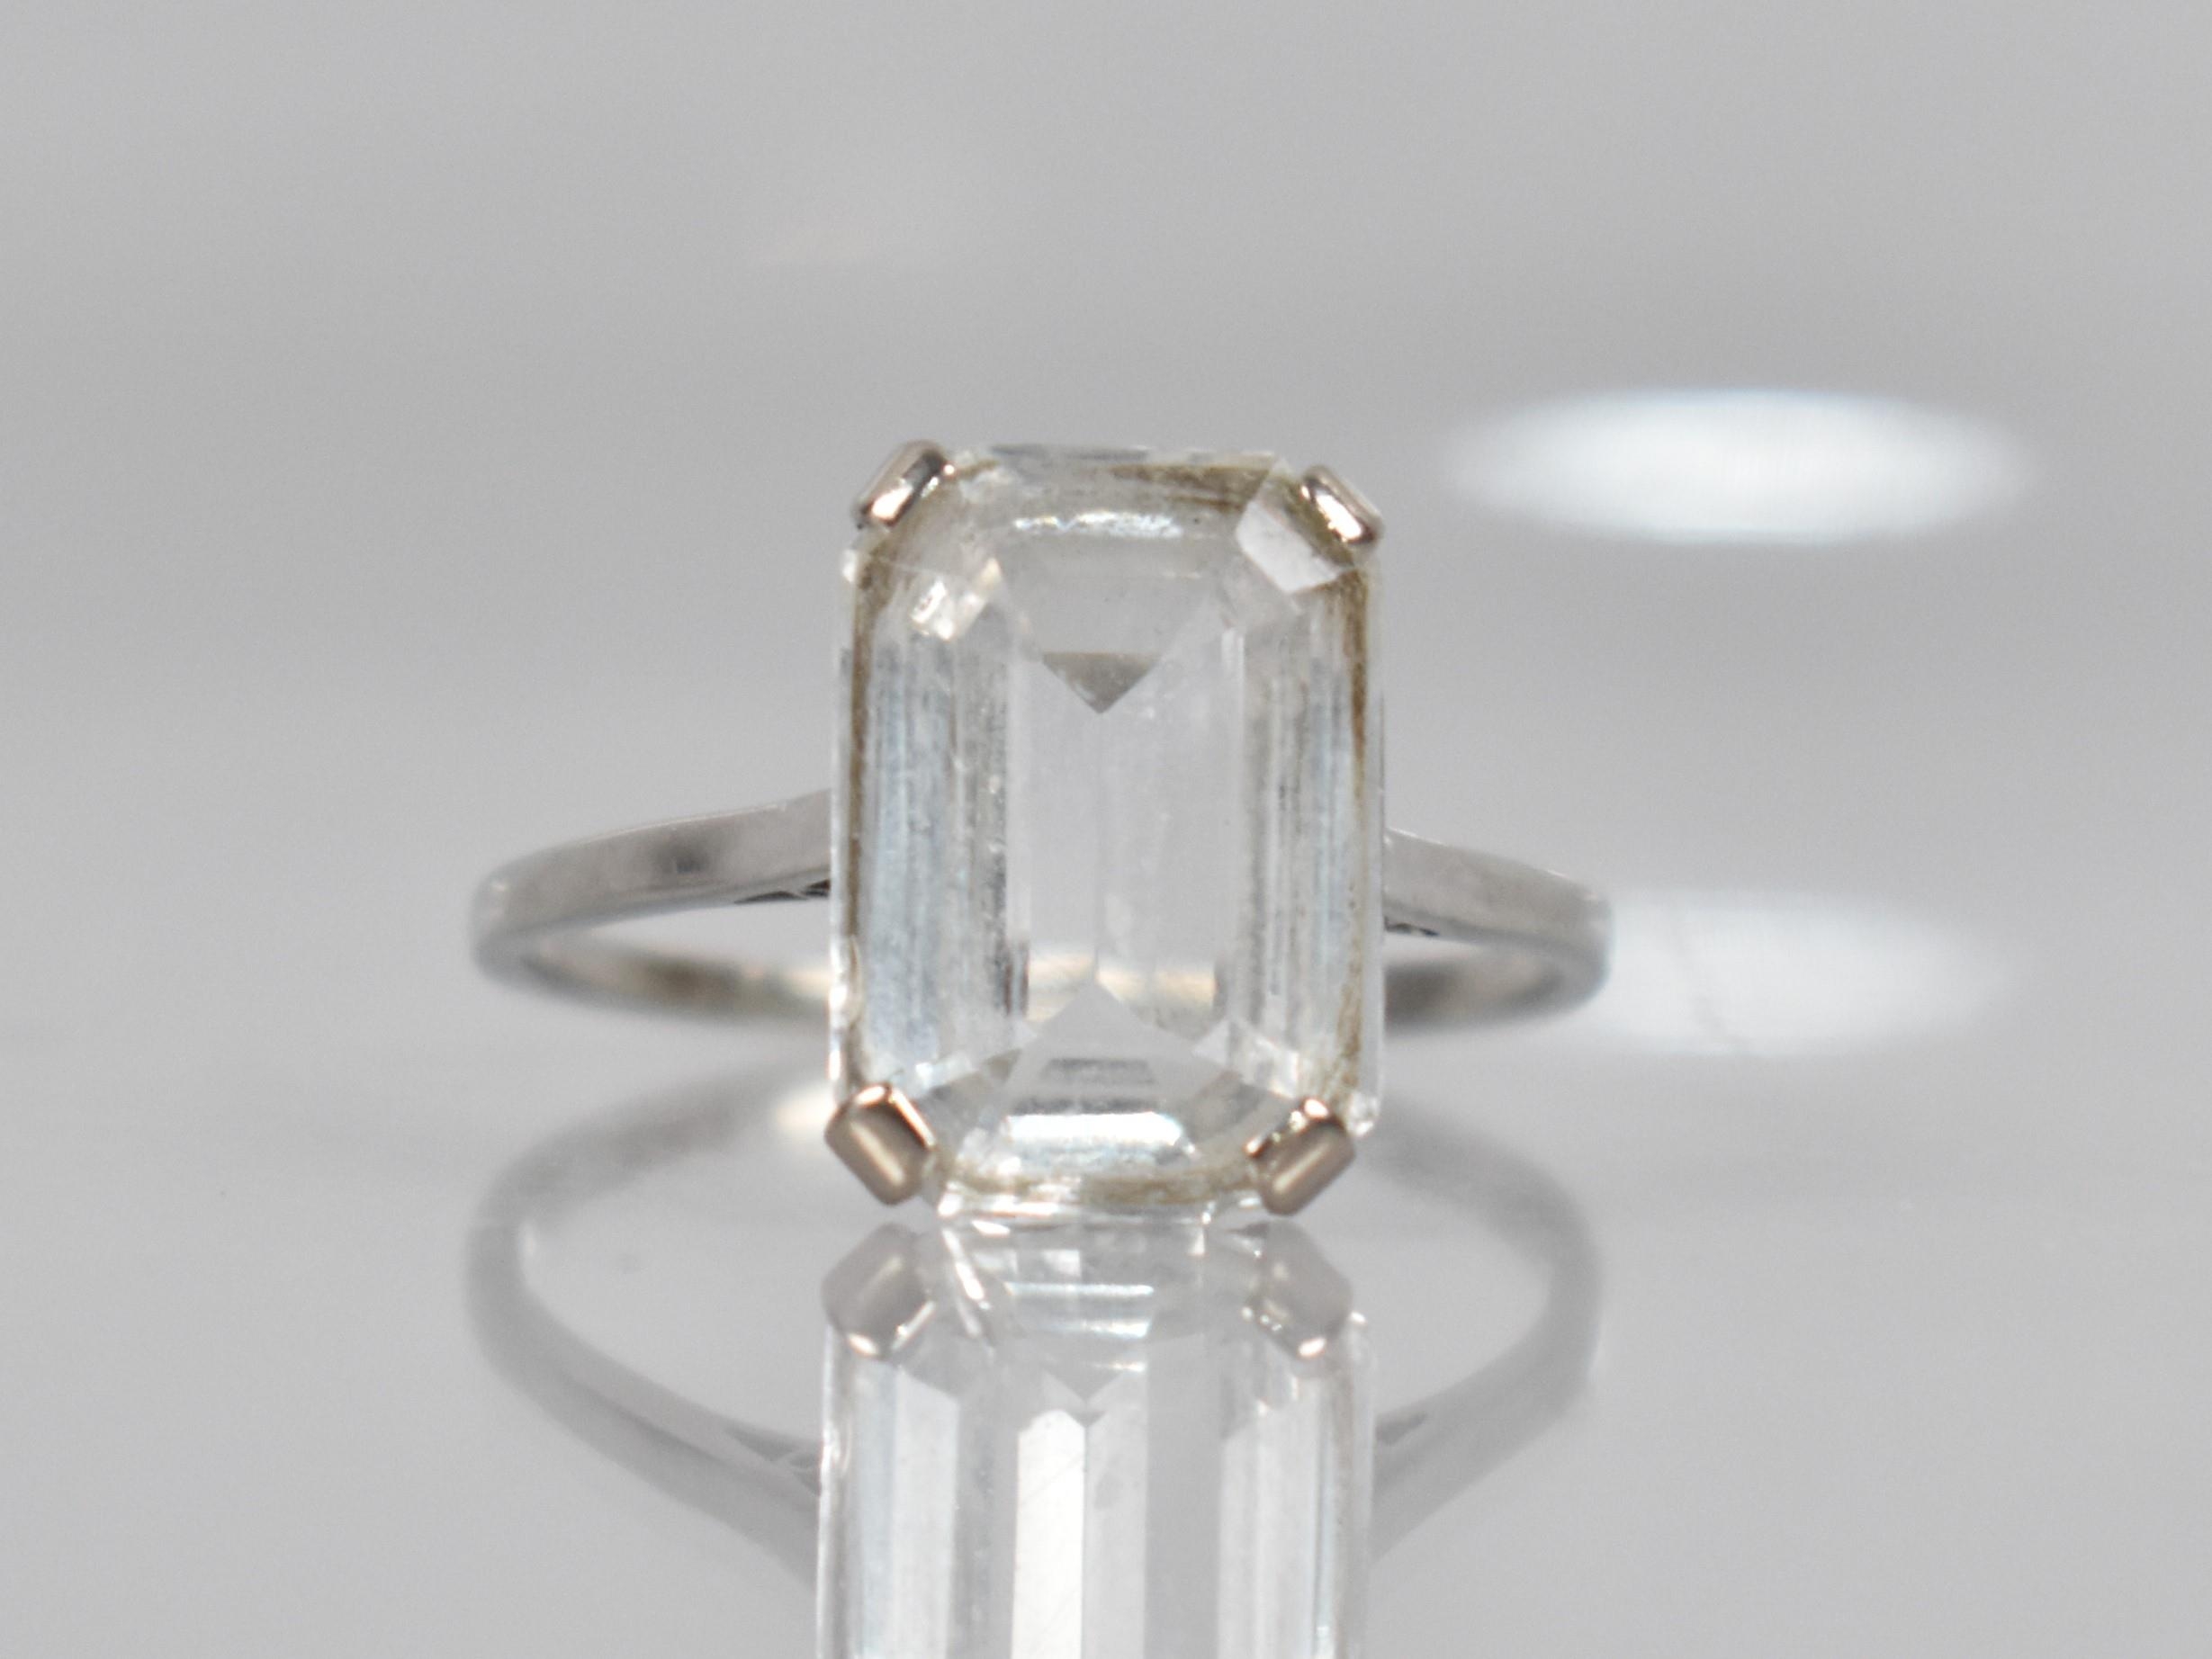 An Art Deco White Sapphire, 18ct Gold and Platinum Ladies Dress Ring, Emerald Cut White Sapphire - Image 2 of 4